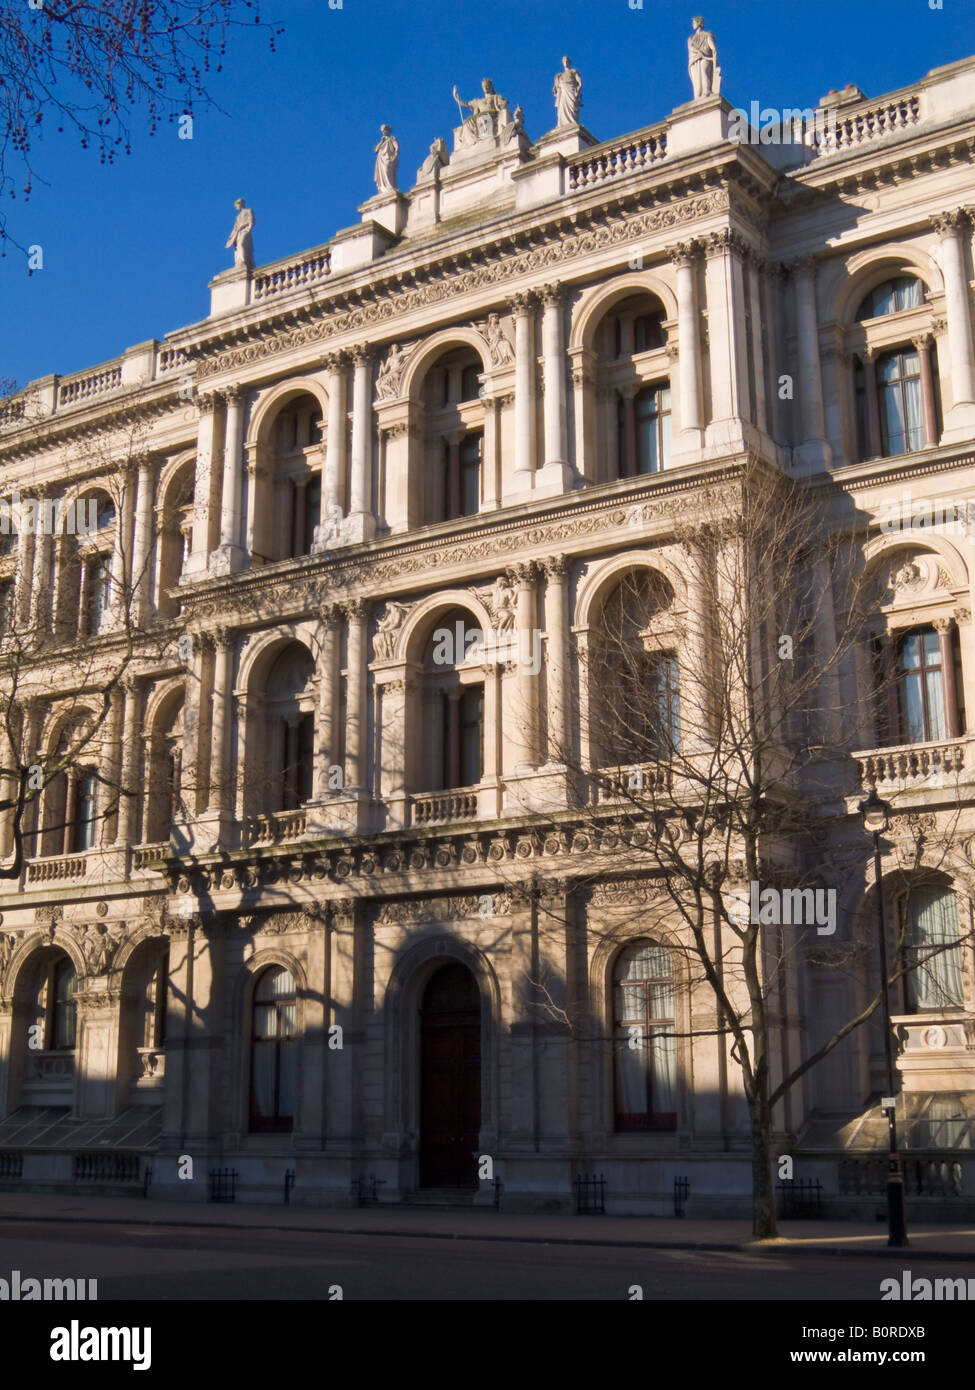 Foreign and Commonwealth Office Whitehall City of Westminster Londra Inghilterra REGNO UNITO Foto Stock